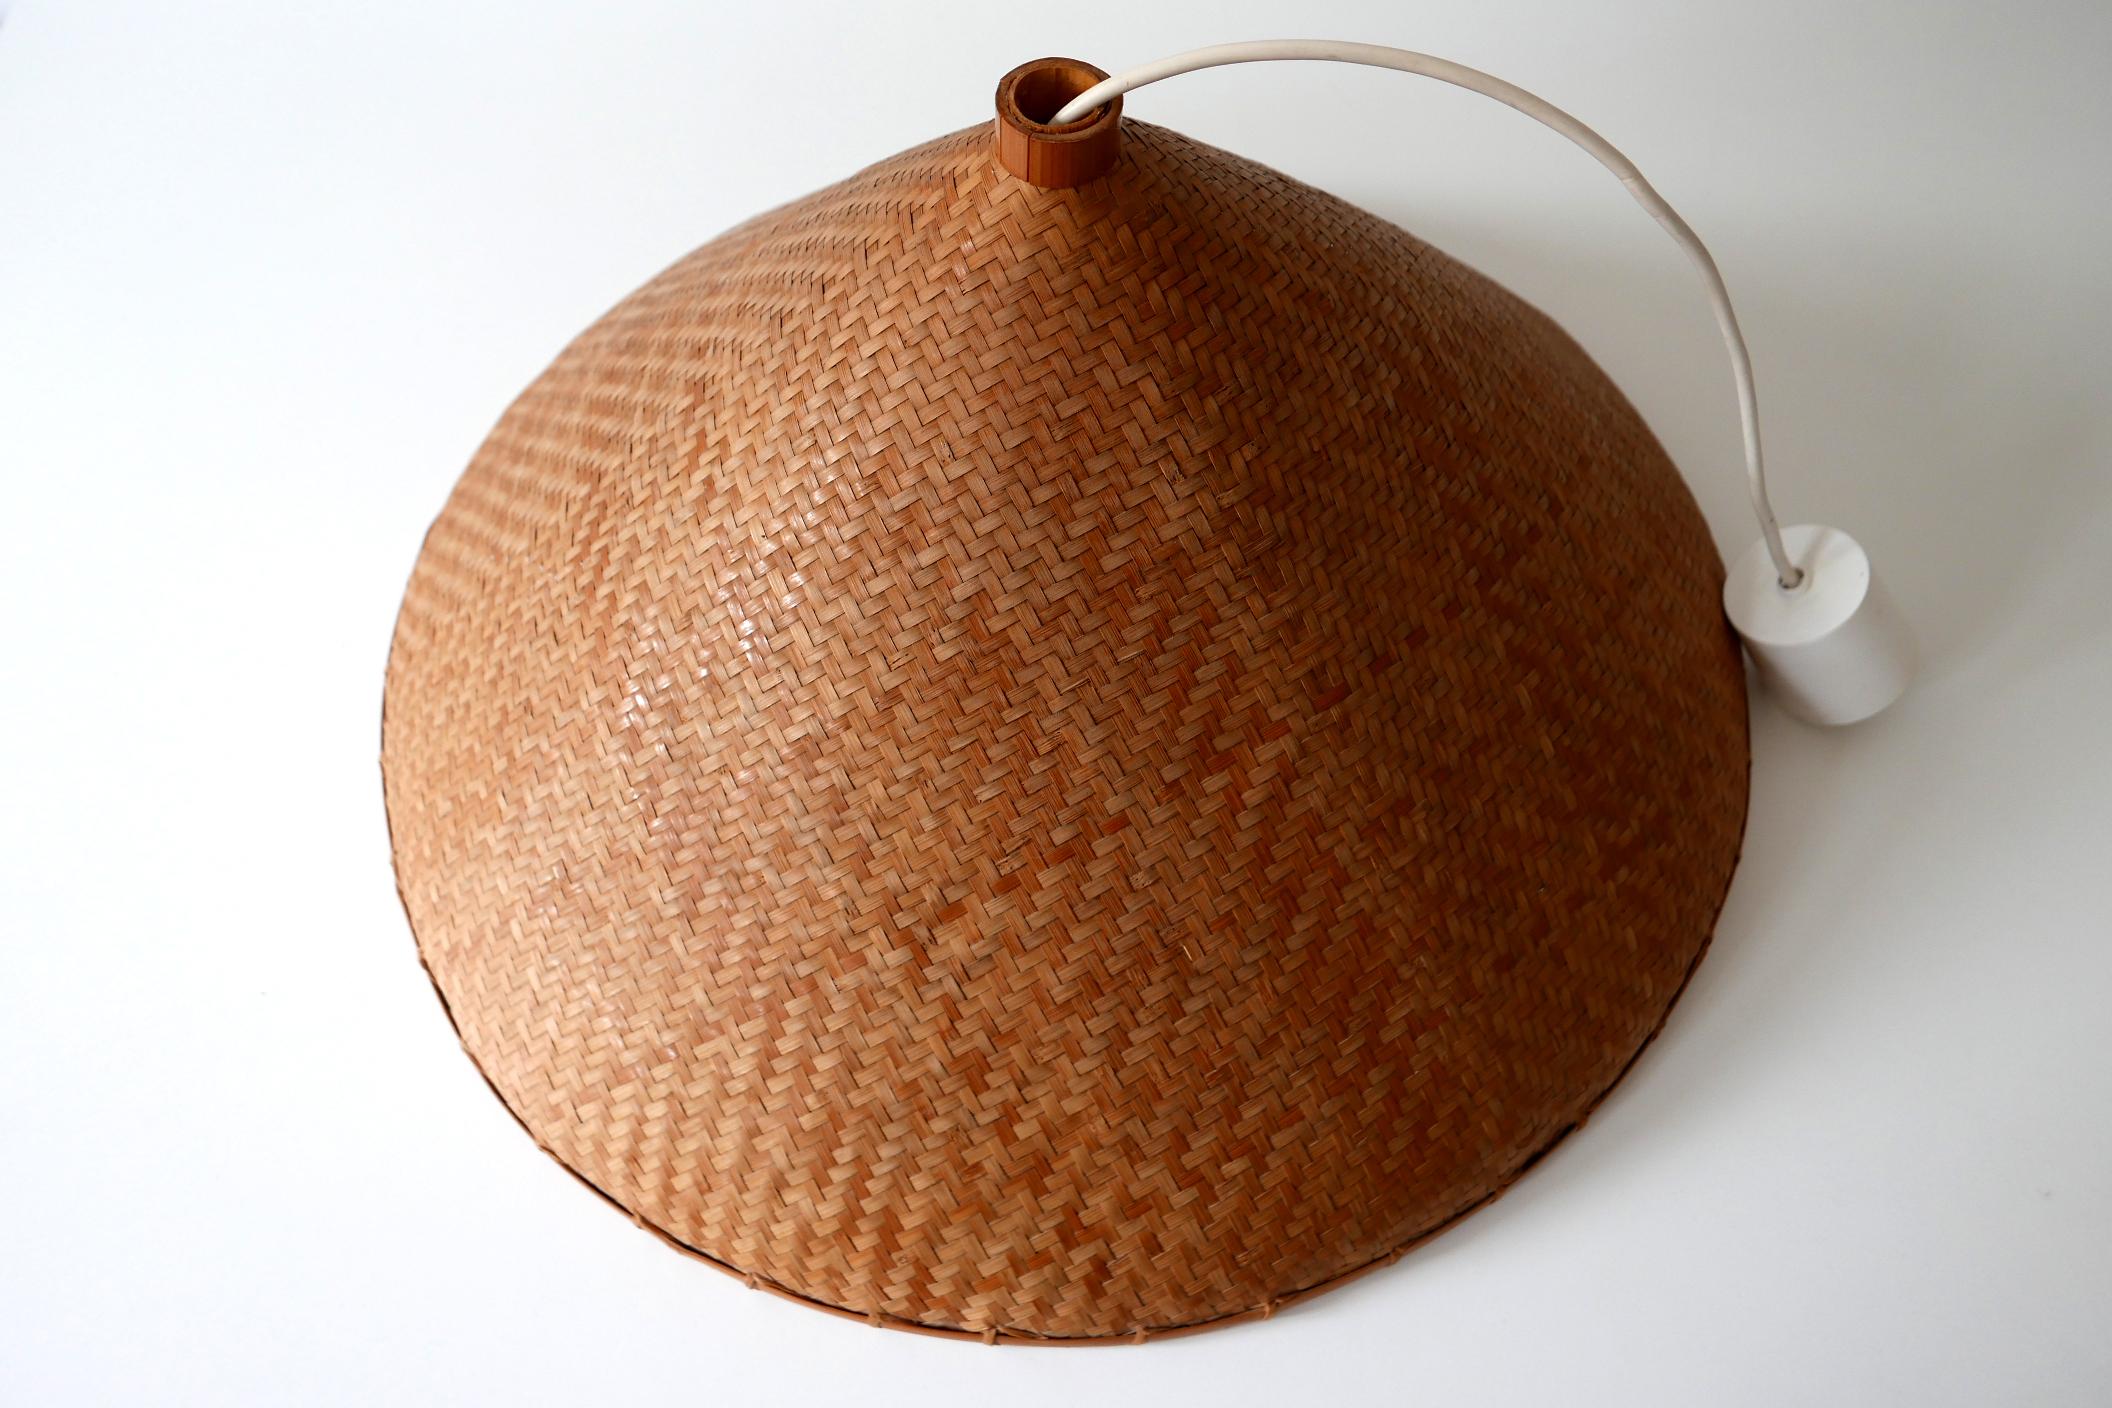 Large Mid-Century Modern Wicker Pendant Lamp or Hanging Light, Germany, 1960s For Sale 10